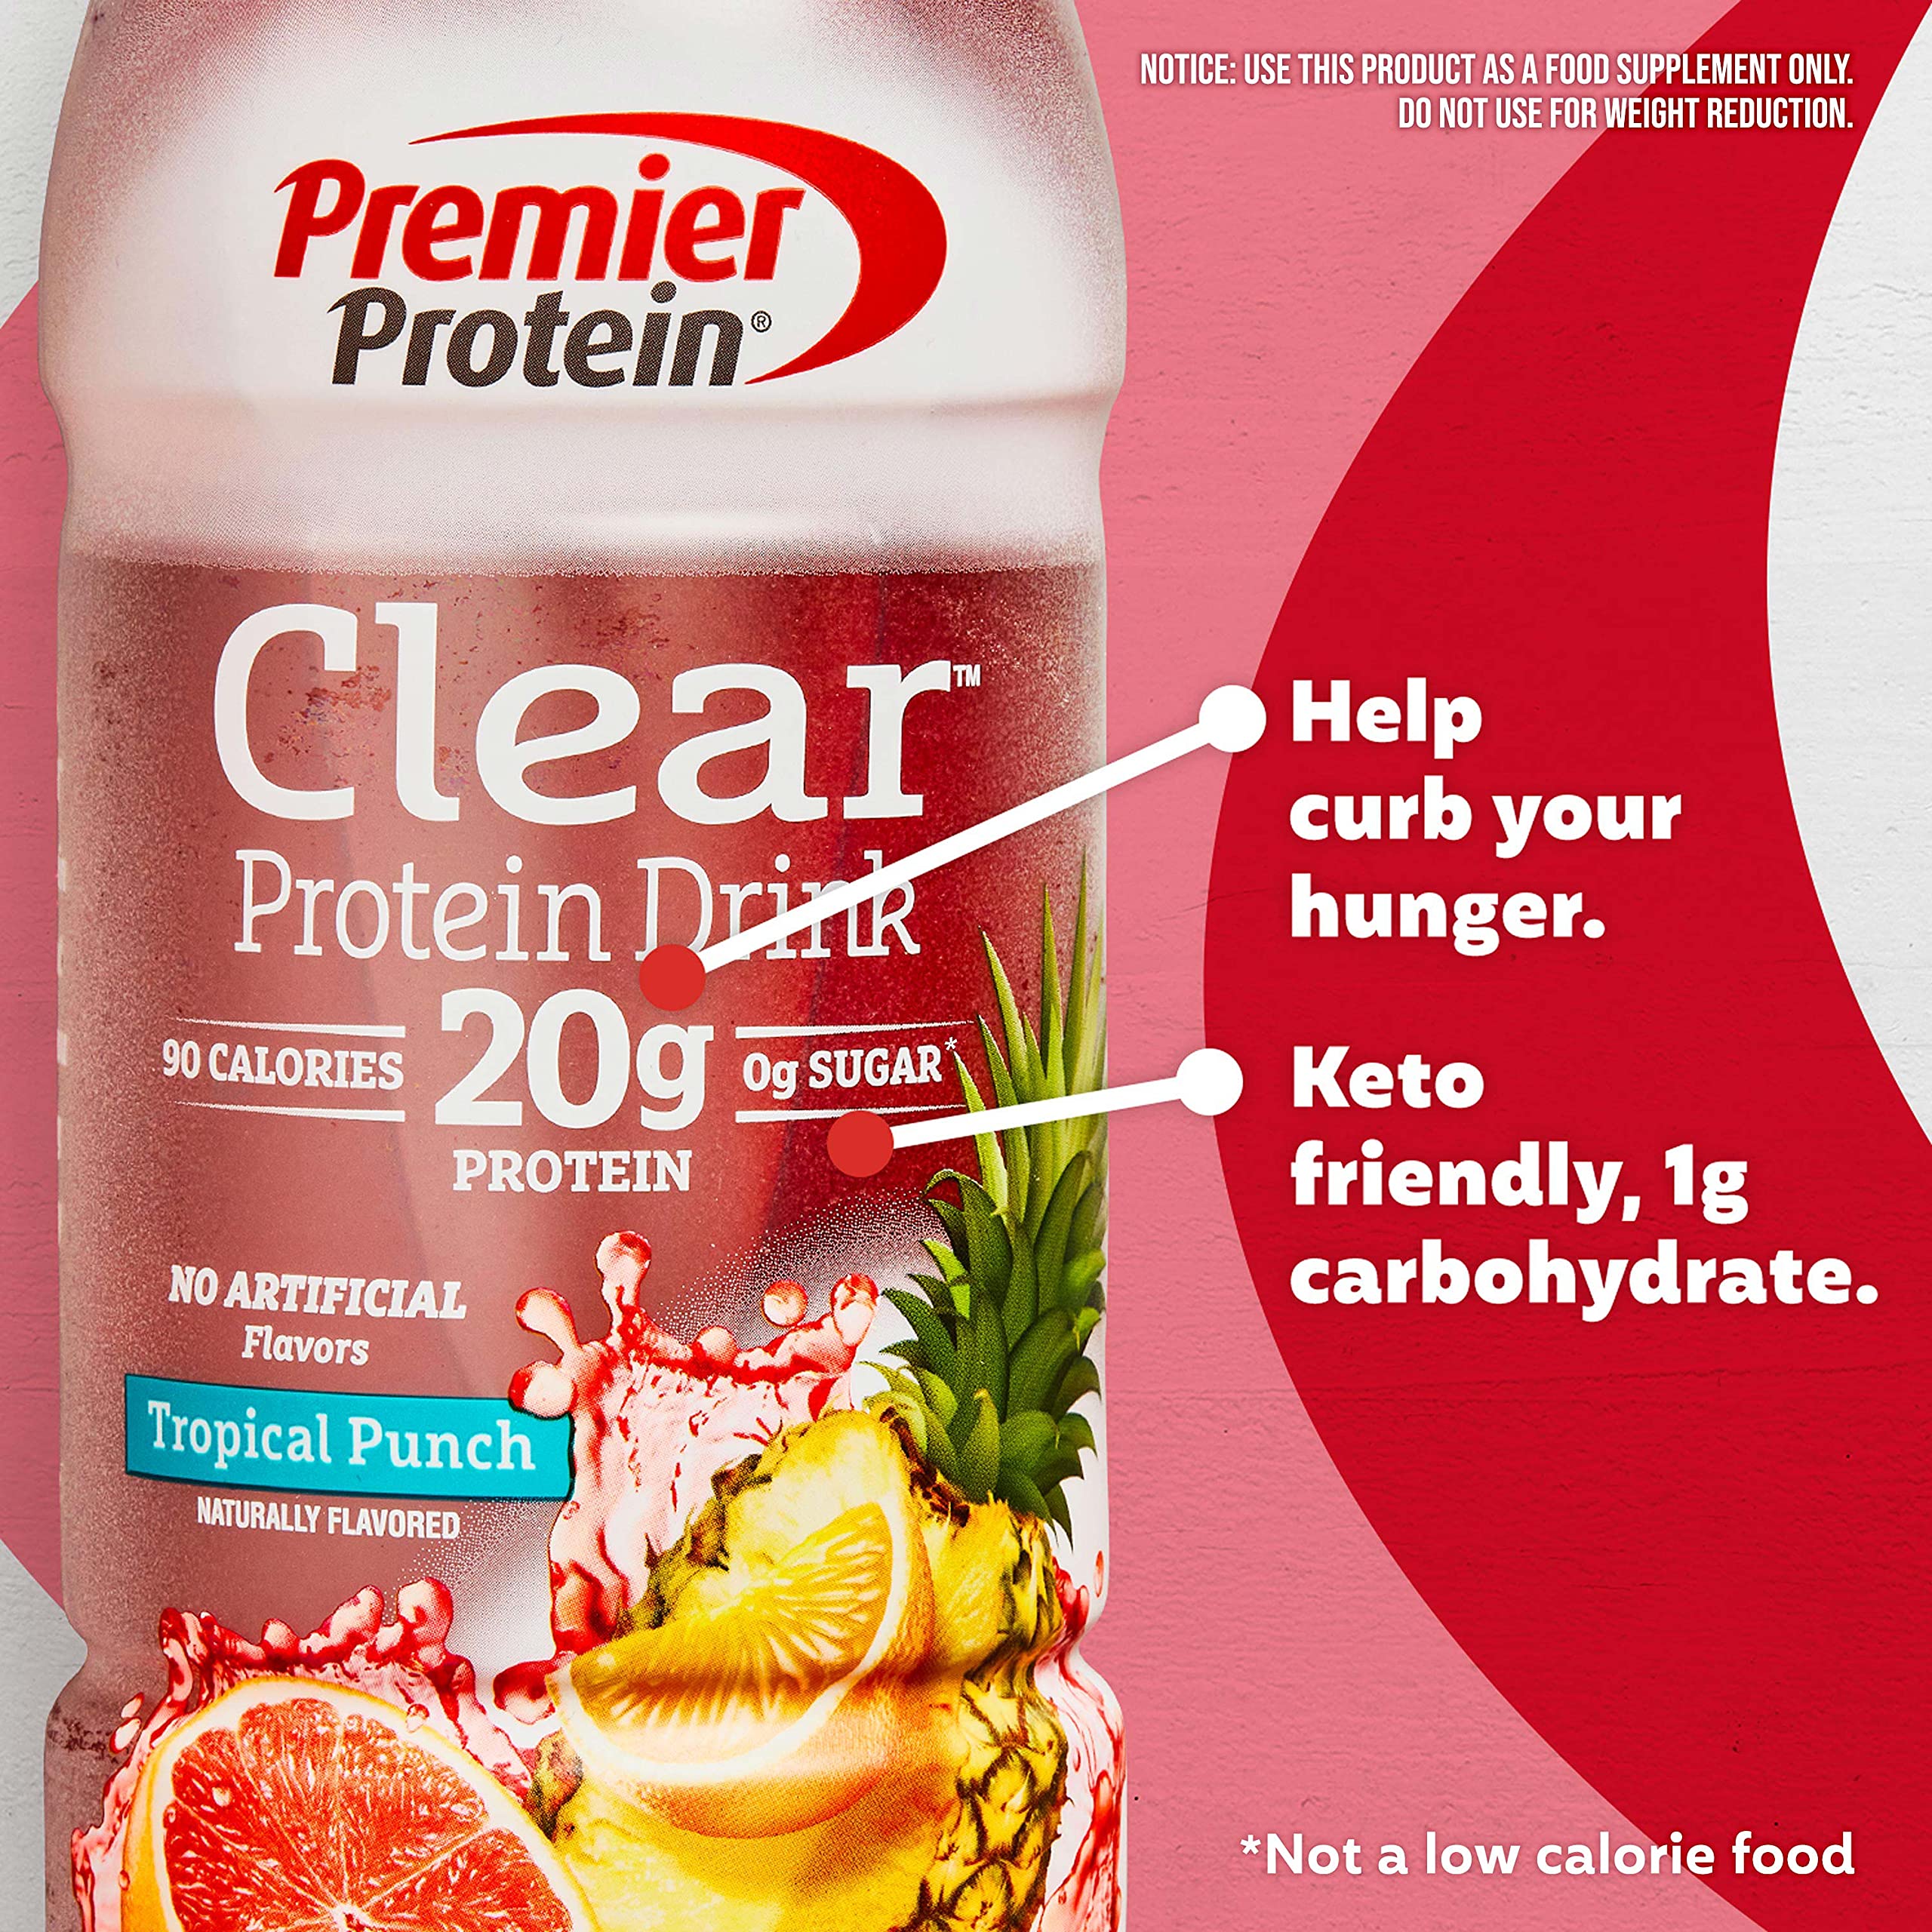 Premier Protein Clear Drink, Tropical Punch, 20g Protein, 0g Sugar, 1g Carb, 90 calories, Keto Friendly, Gluten Free, No Soy Ingredients 16.9 Fl Oz (Pack of 12)